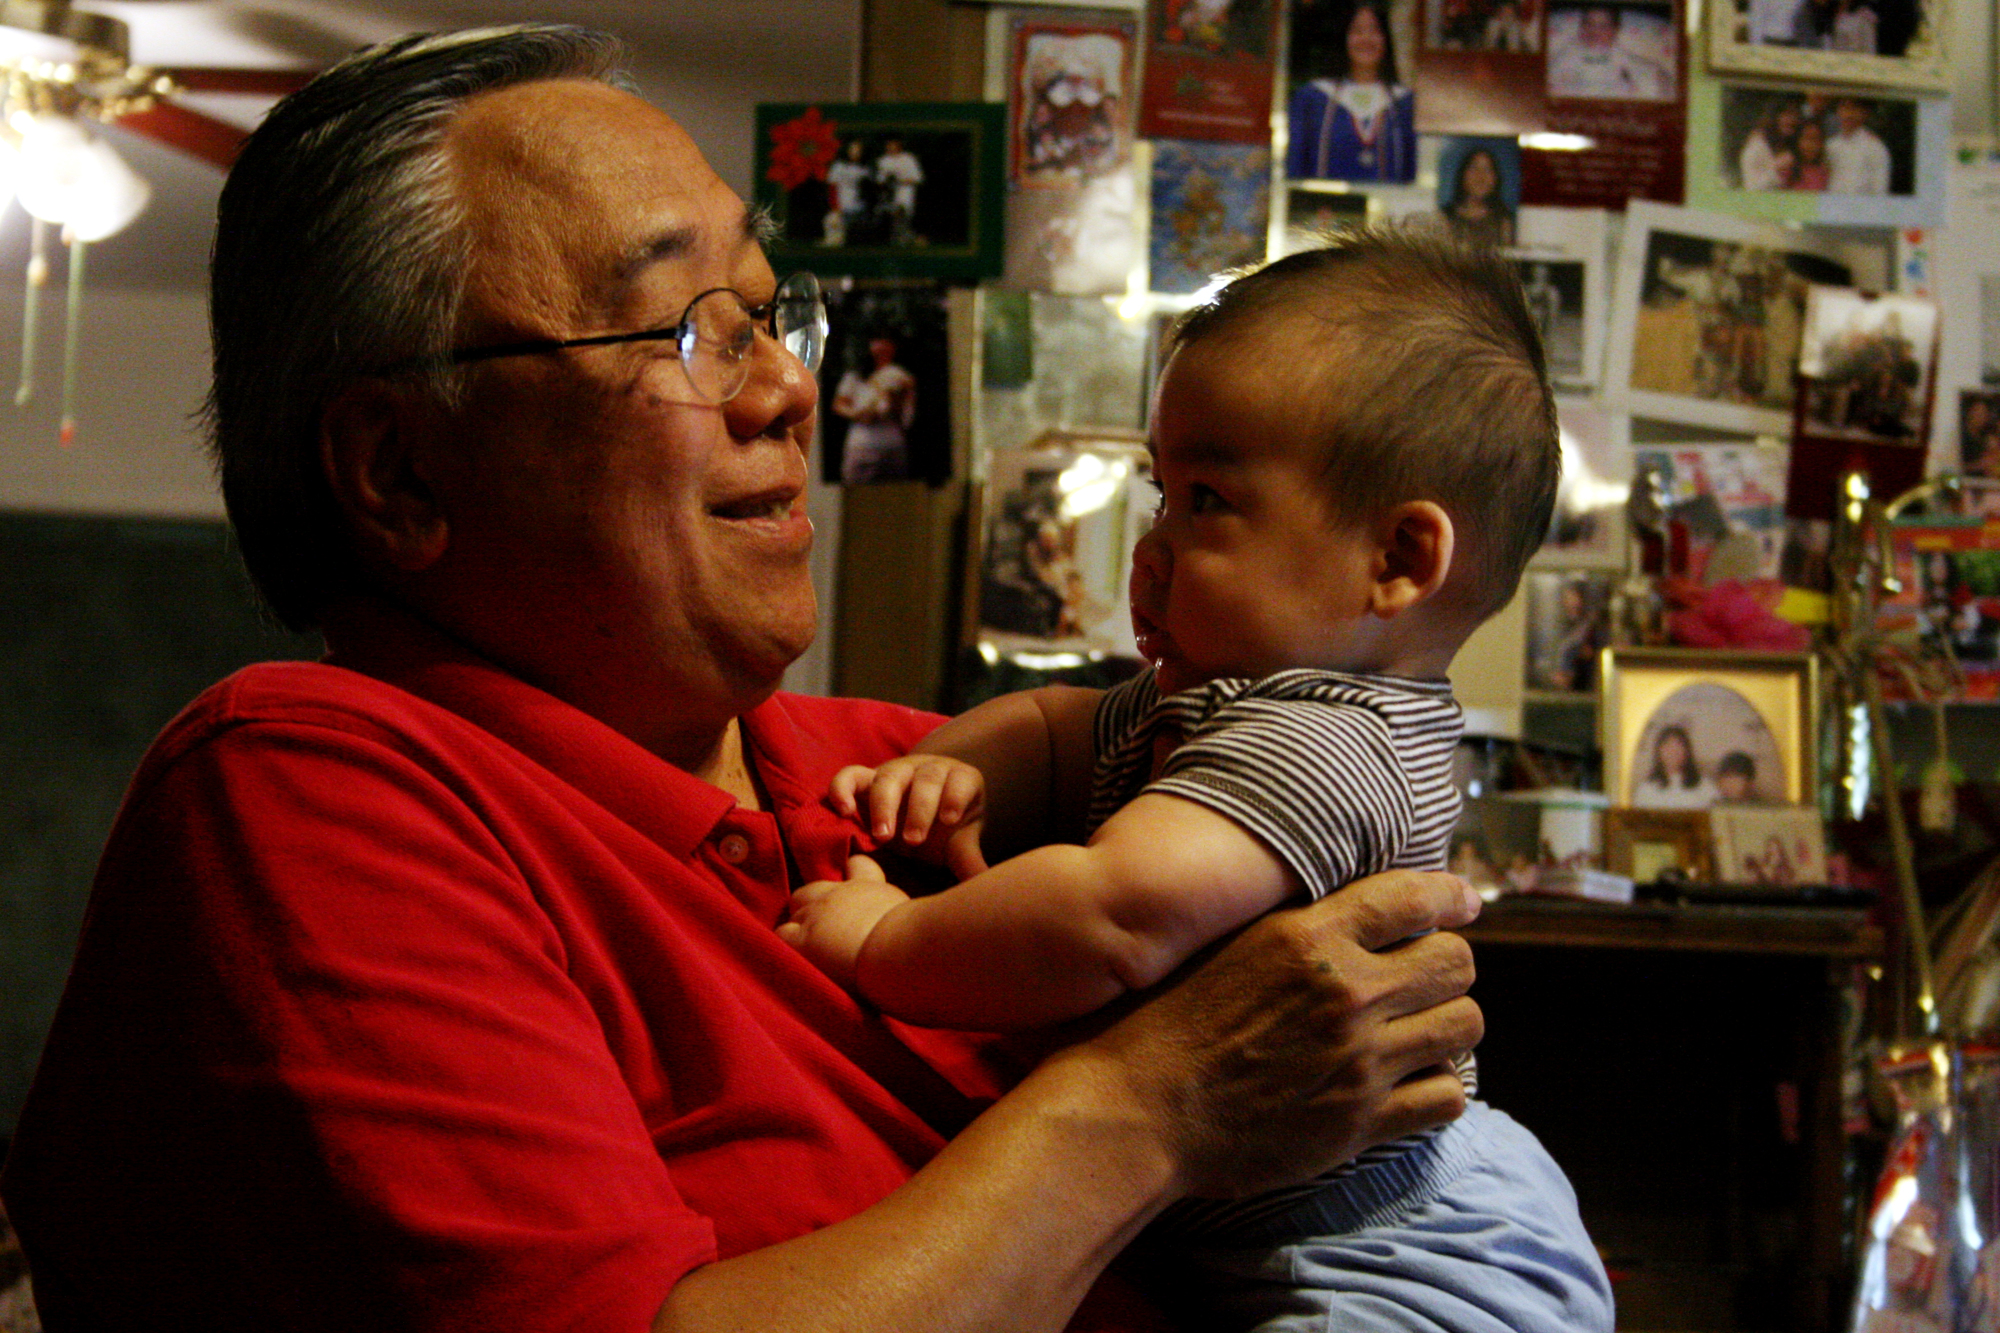 My dad and my son meeting for the first time, October 2008.